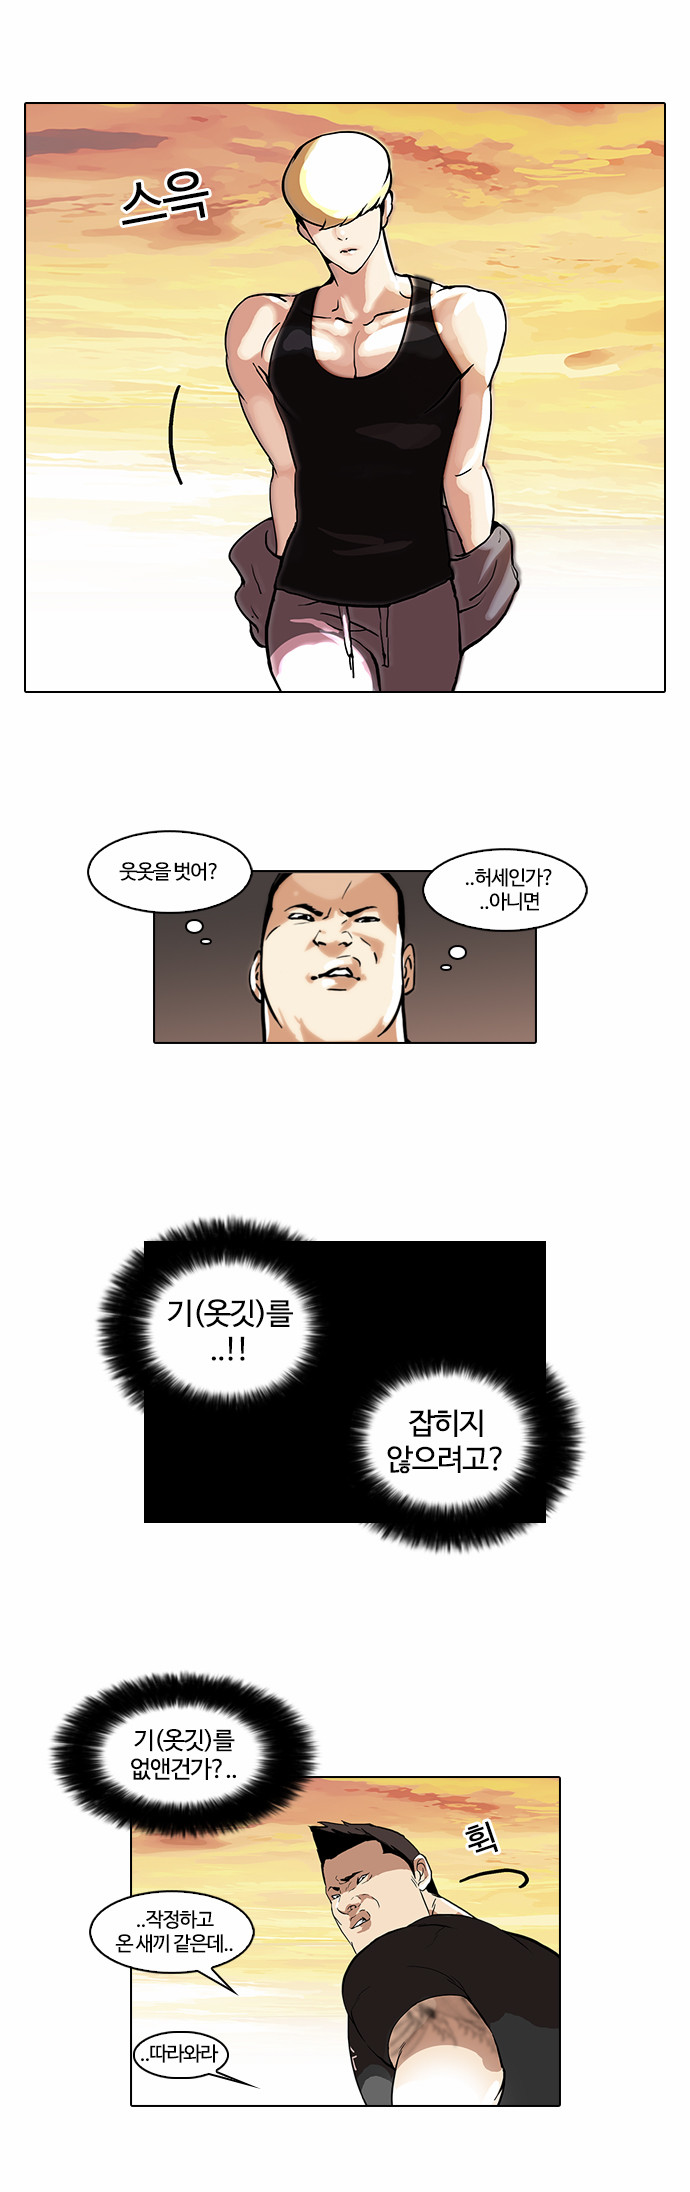 Lookism - Chapter 49 - Page 2